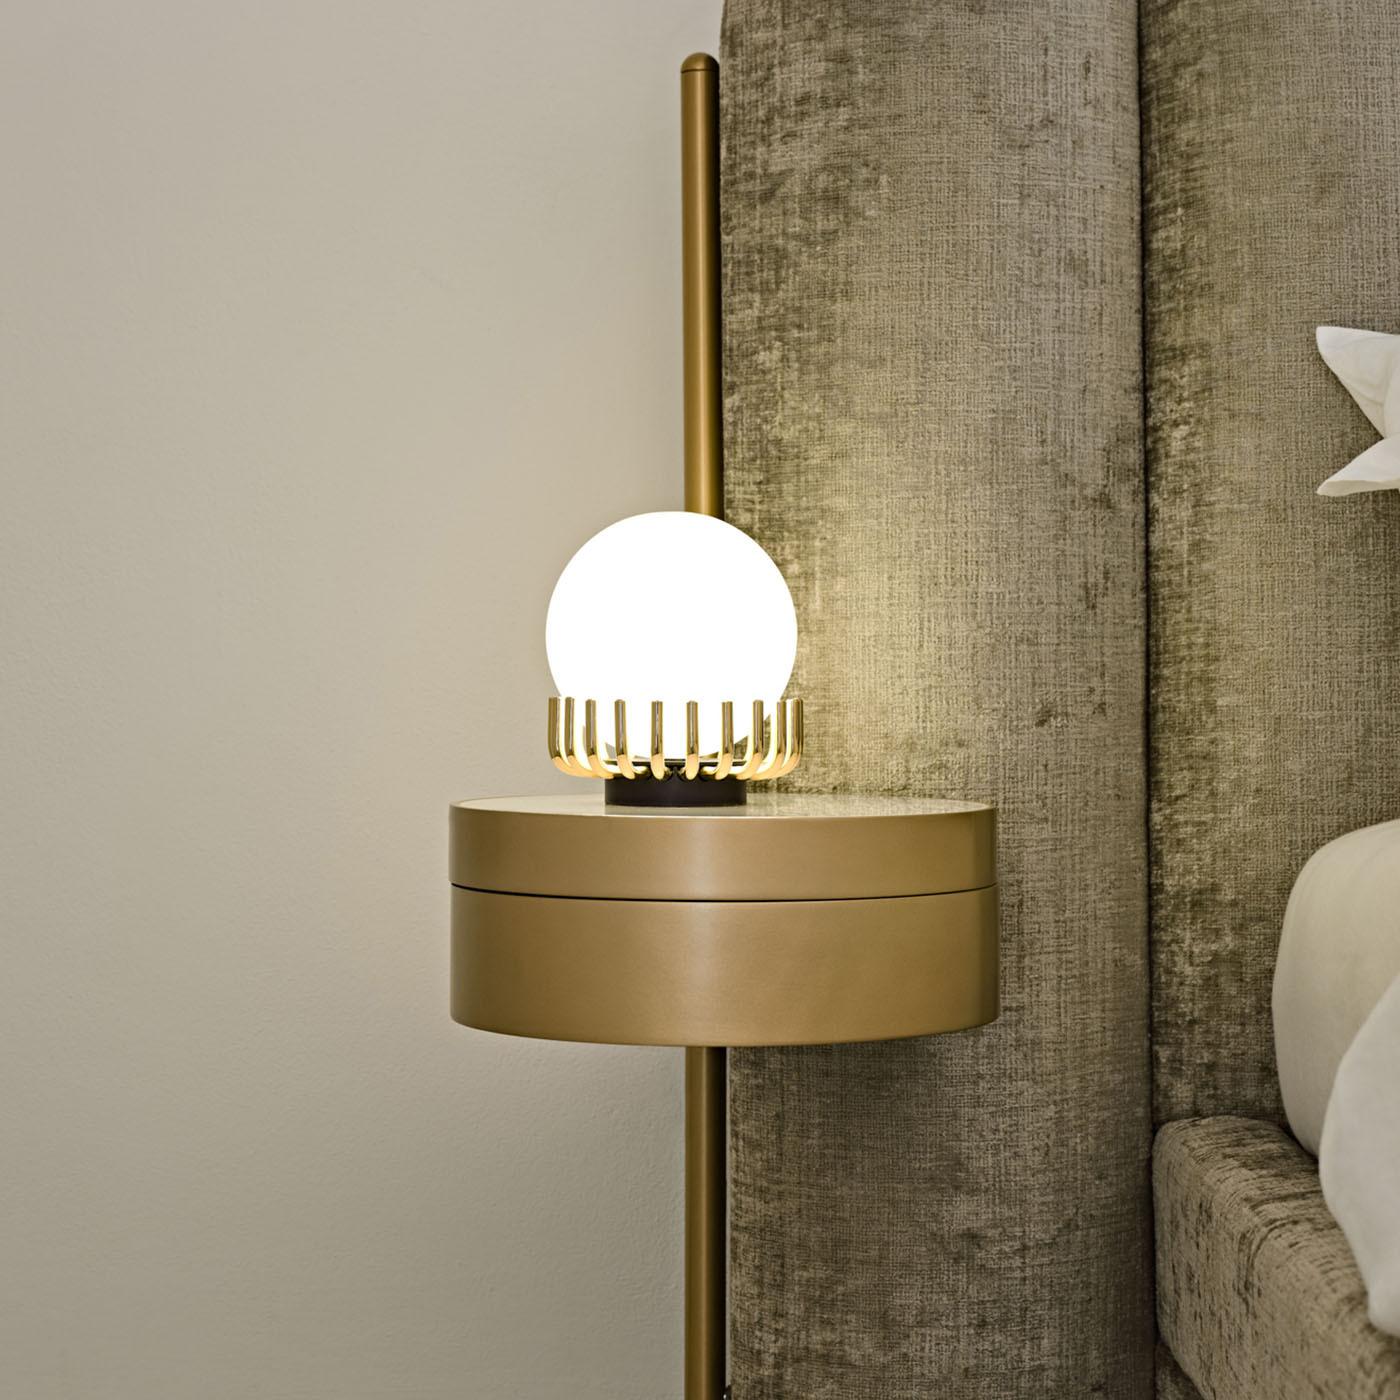 A glossy opaline glass sphere seemingly embraced by rays surrounding its base is the distinguishing element of this table lamp. The curved cylindrical elements in galvanized golden metal stem from a round-cut base are finished in matte black for a